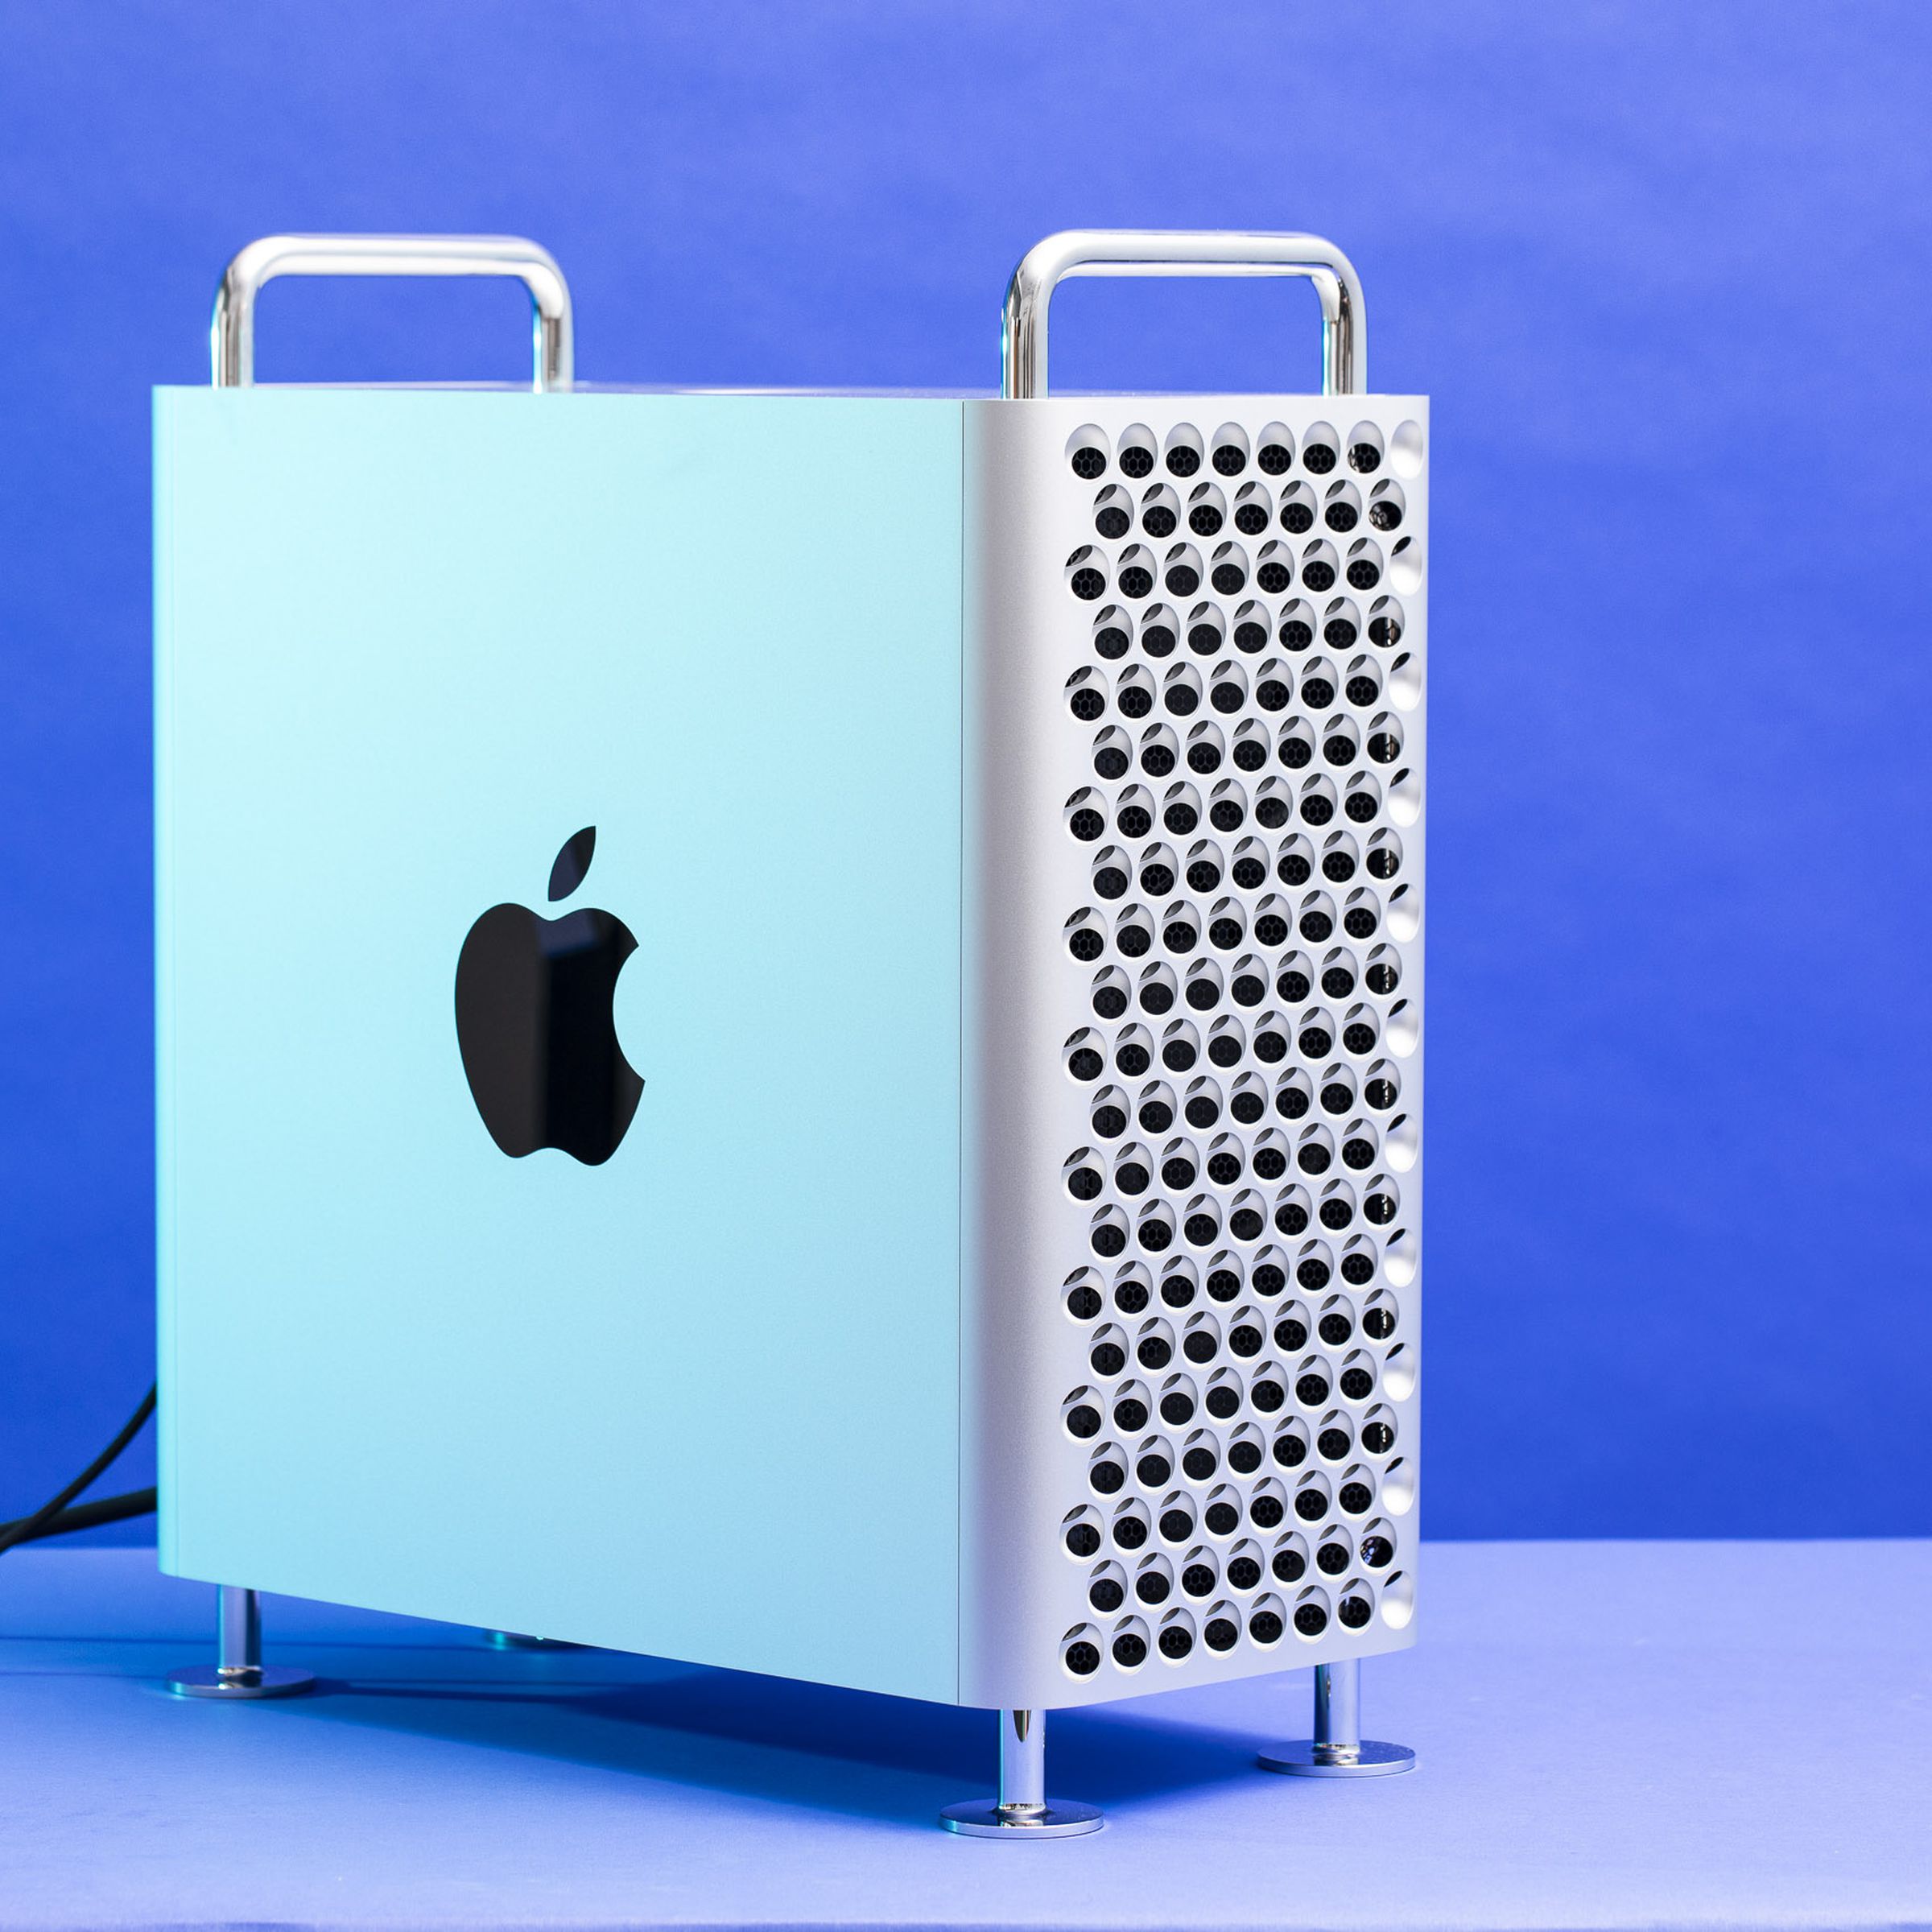 The Mac Pro seen from the side.